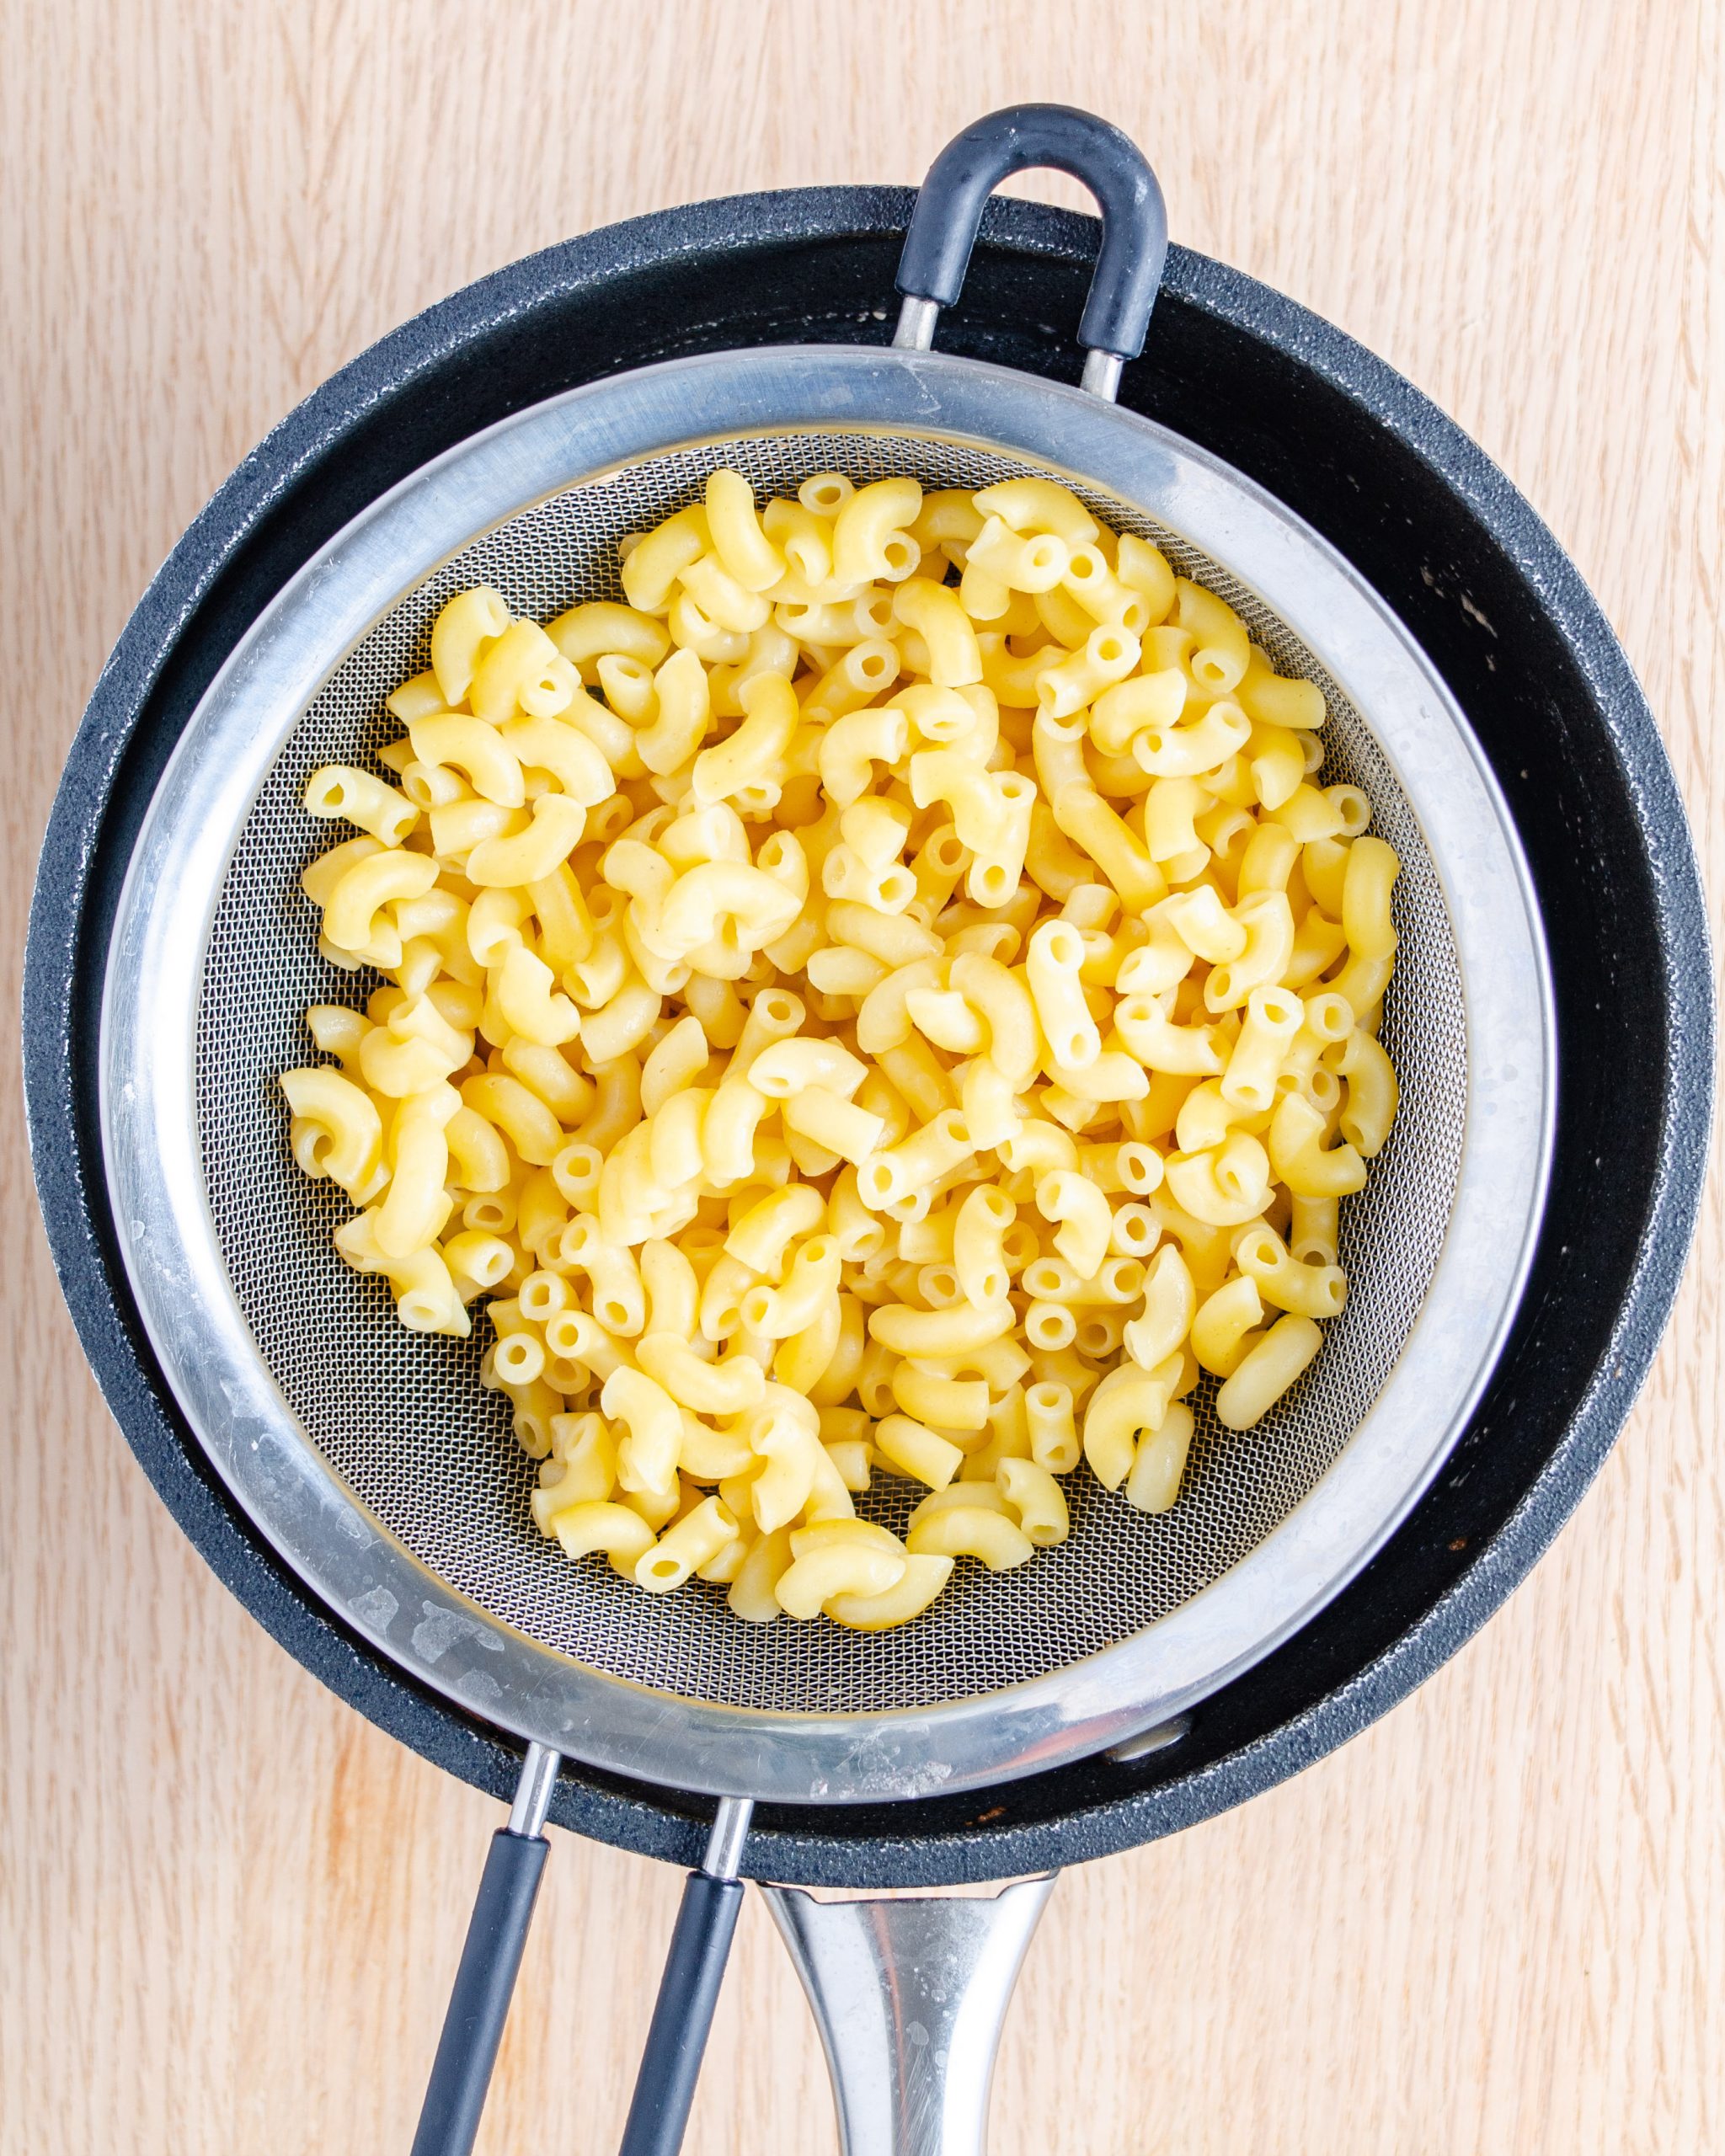 Boil the macaroni until it is done to your liking, rinse in cold water, and drain.